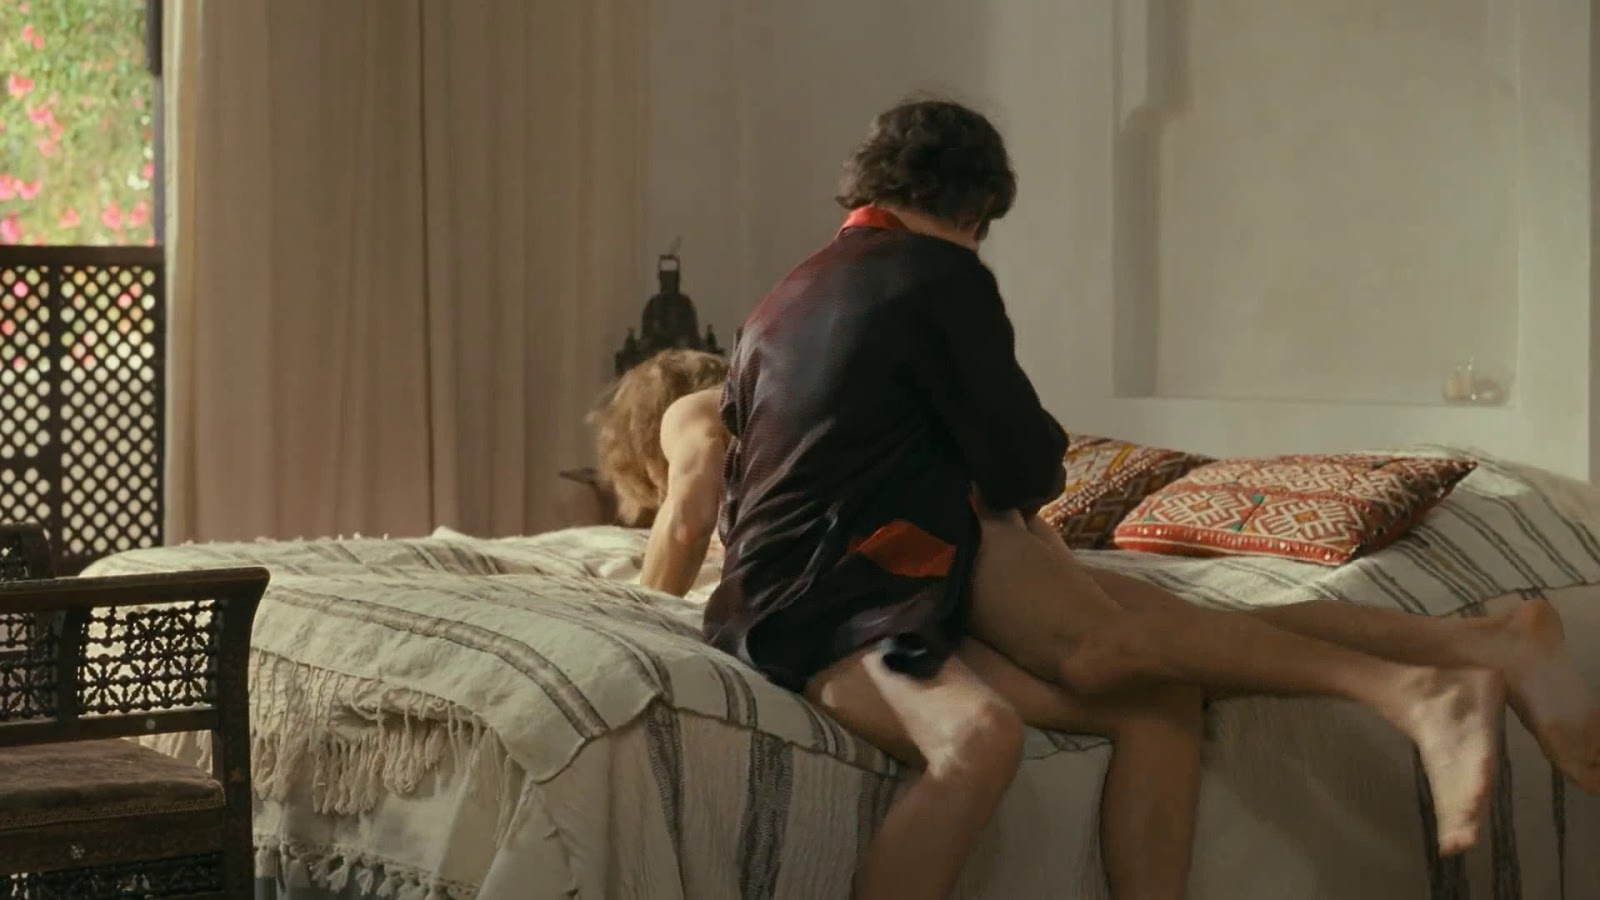 The Stars Come Out To Play: Gaspard Ulliel - Naked in "Saint